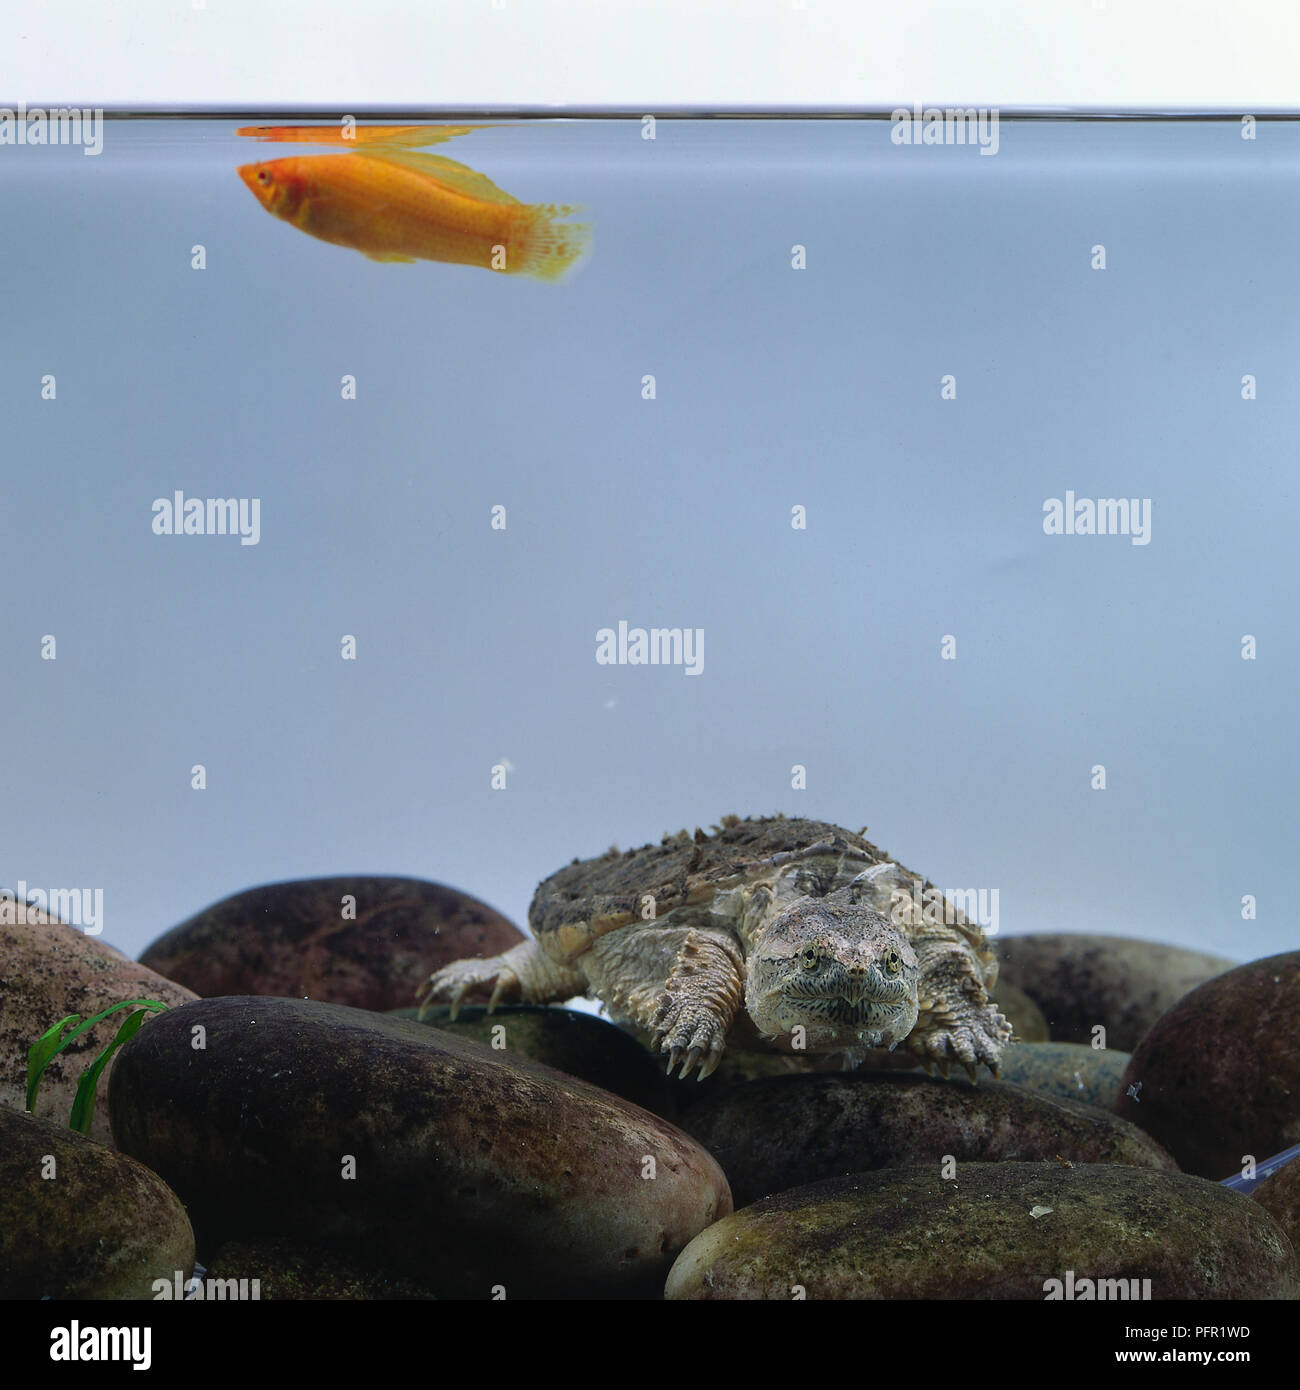 Snapping turtle (Chelydra serpentina) and goldfish in tank Stock Photo